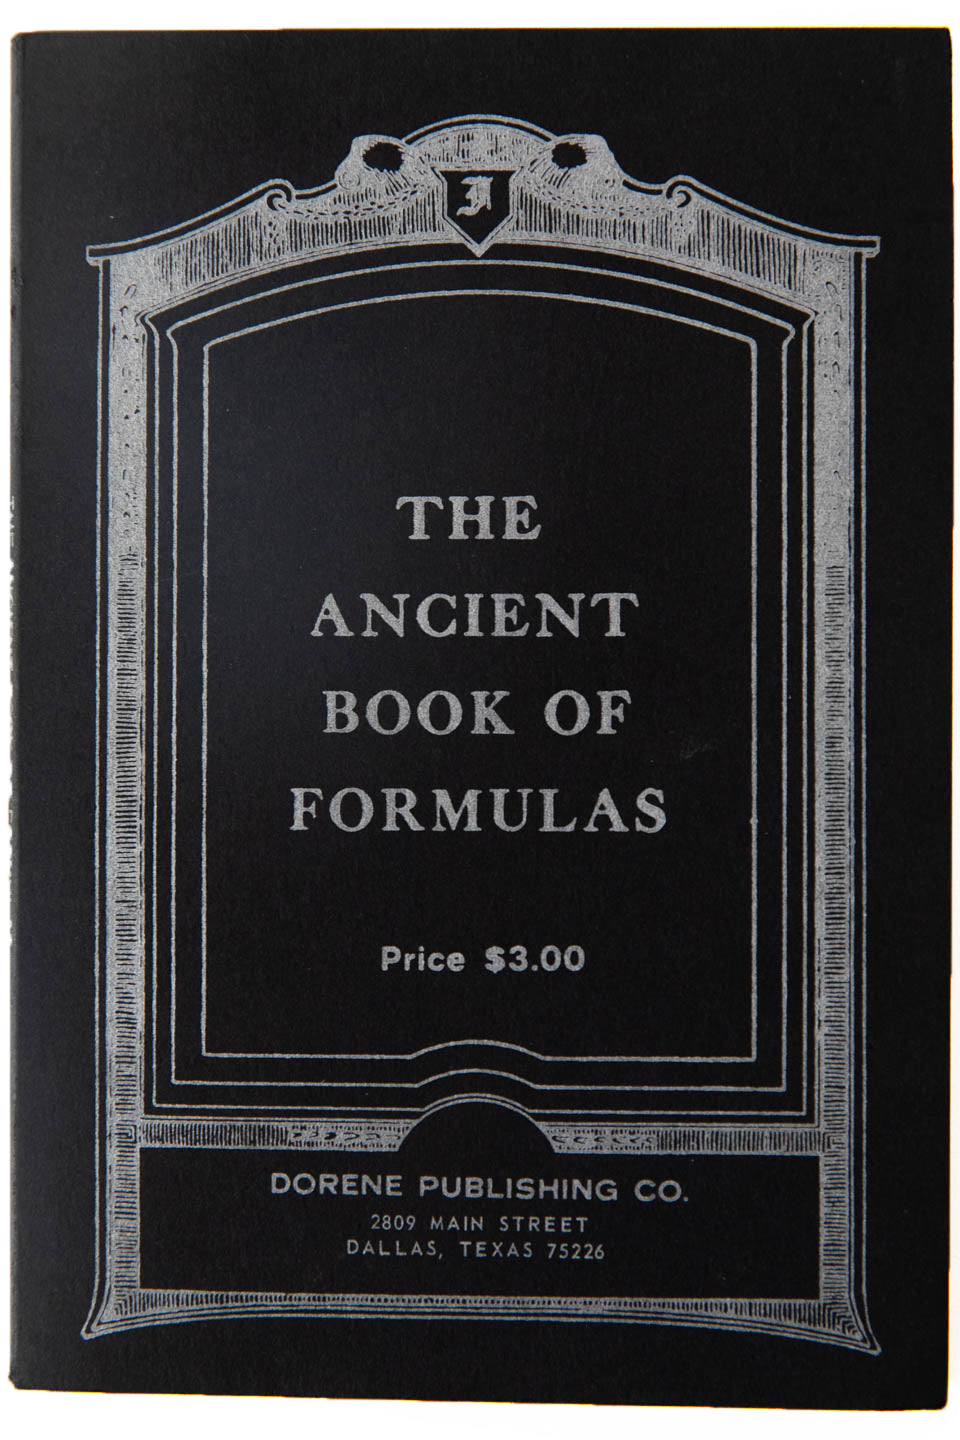 THE ANCIENT BOOK OF FORMULAS